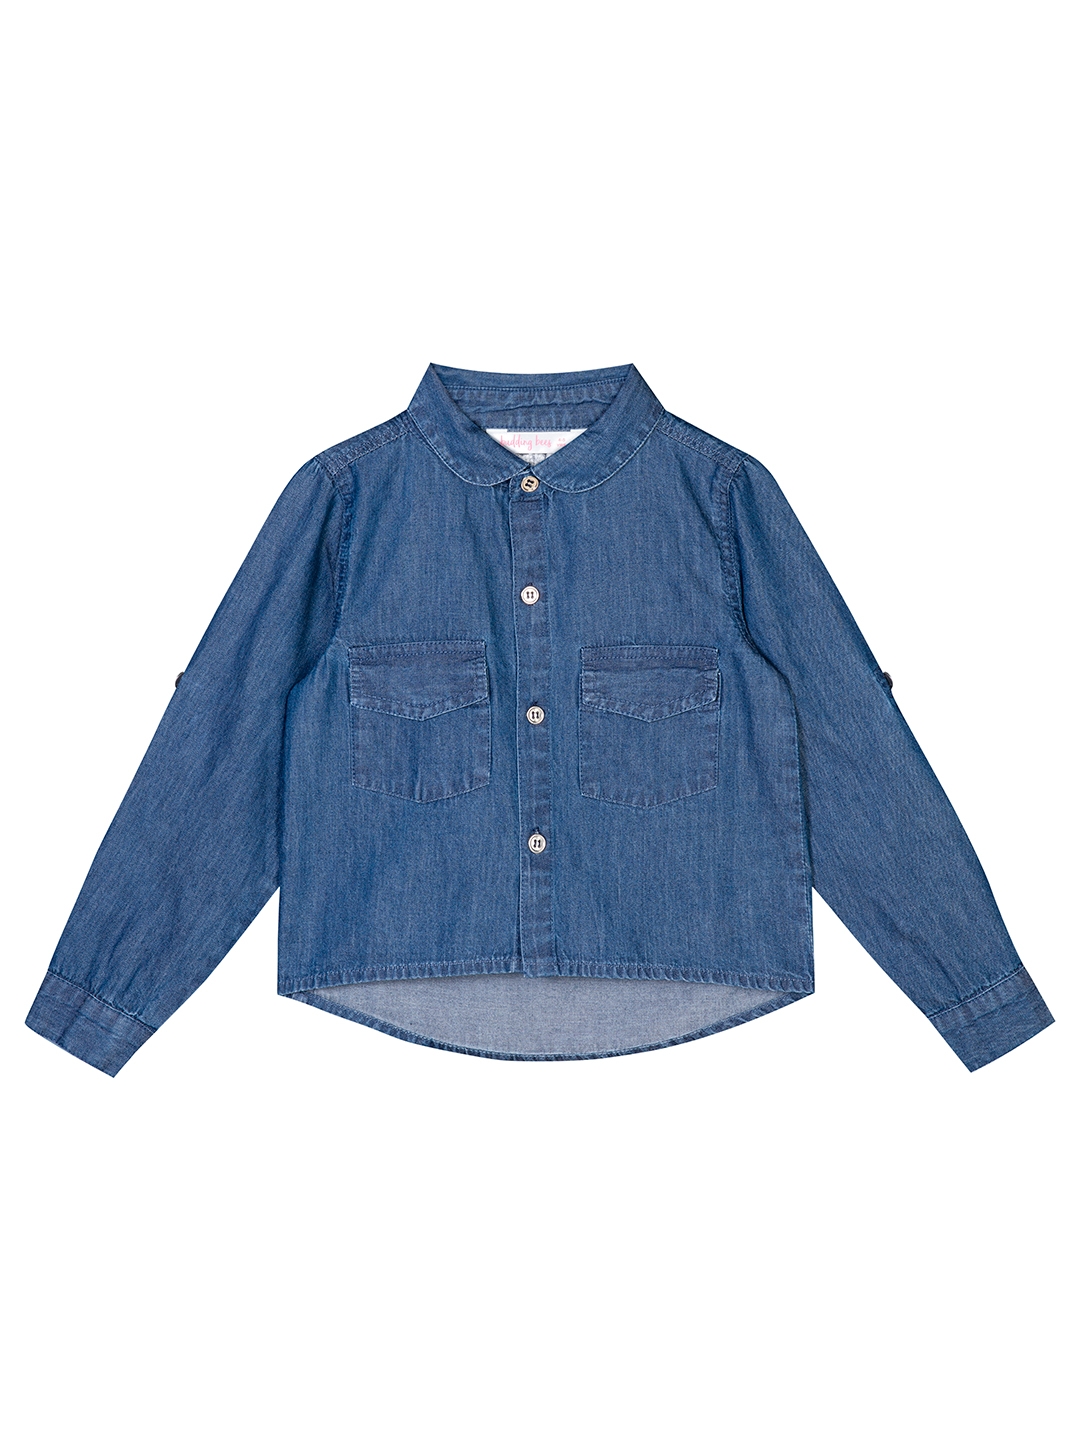 Budding Bees Boys Denim Full Sleeve Embroidered with Pocket Shirt-Blue